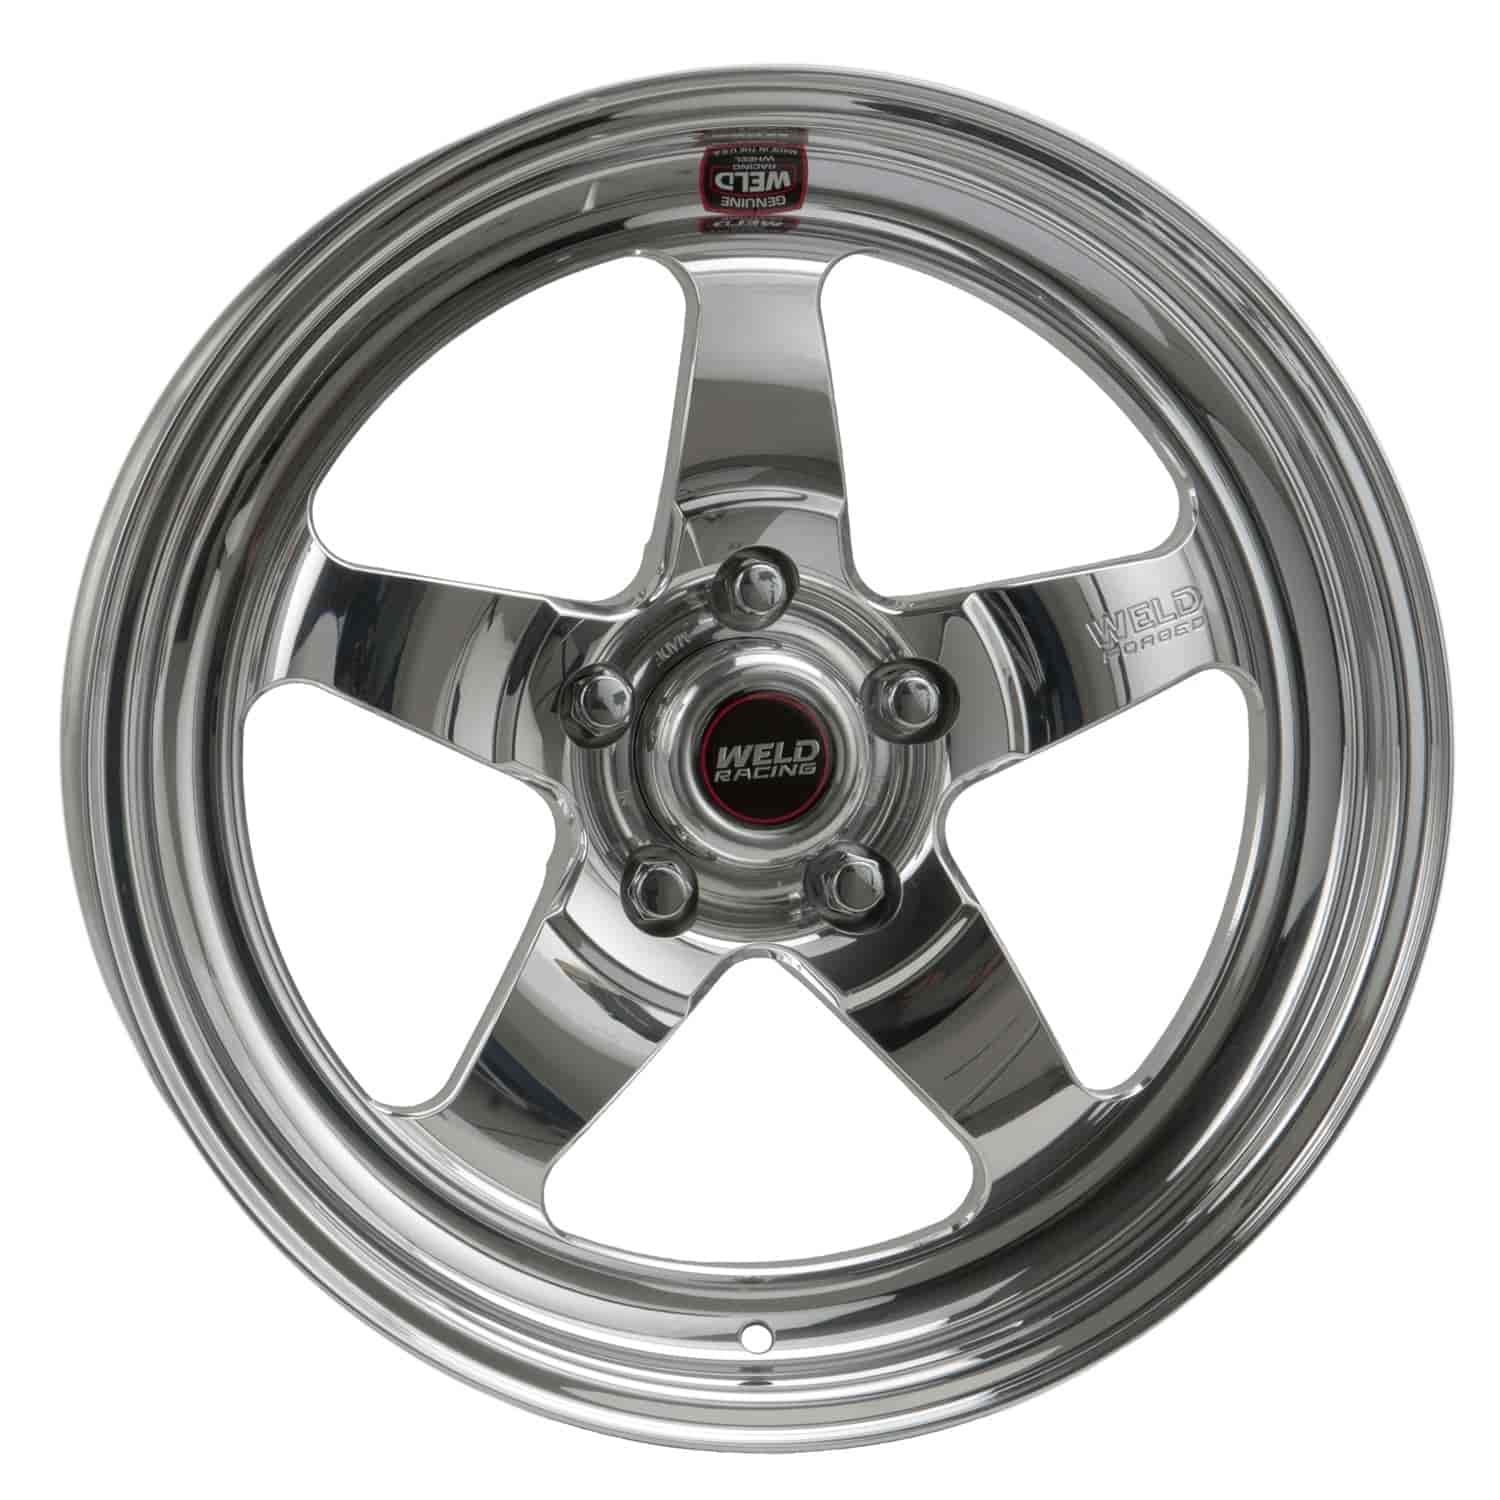 RT-S Series Wheel Size: 15" x 10" Bolt Circle: 5 x 4-3/4" Back Space: 7-1/2"